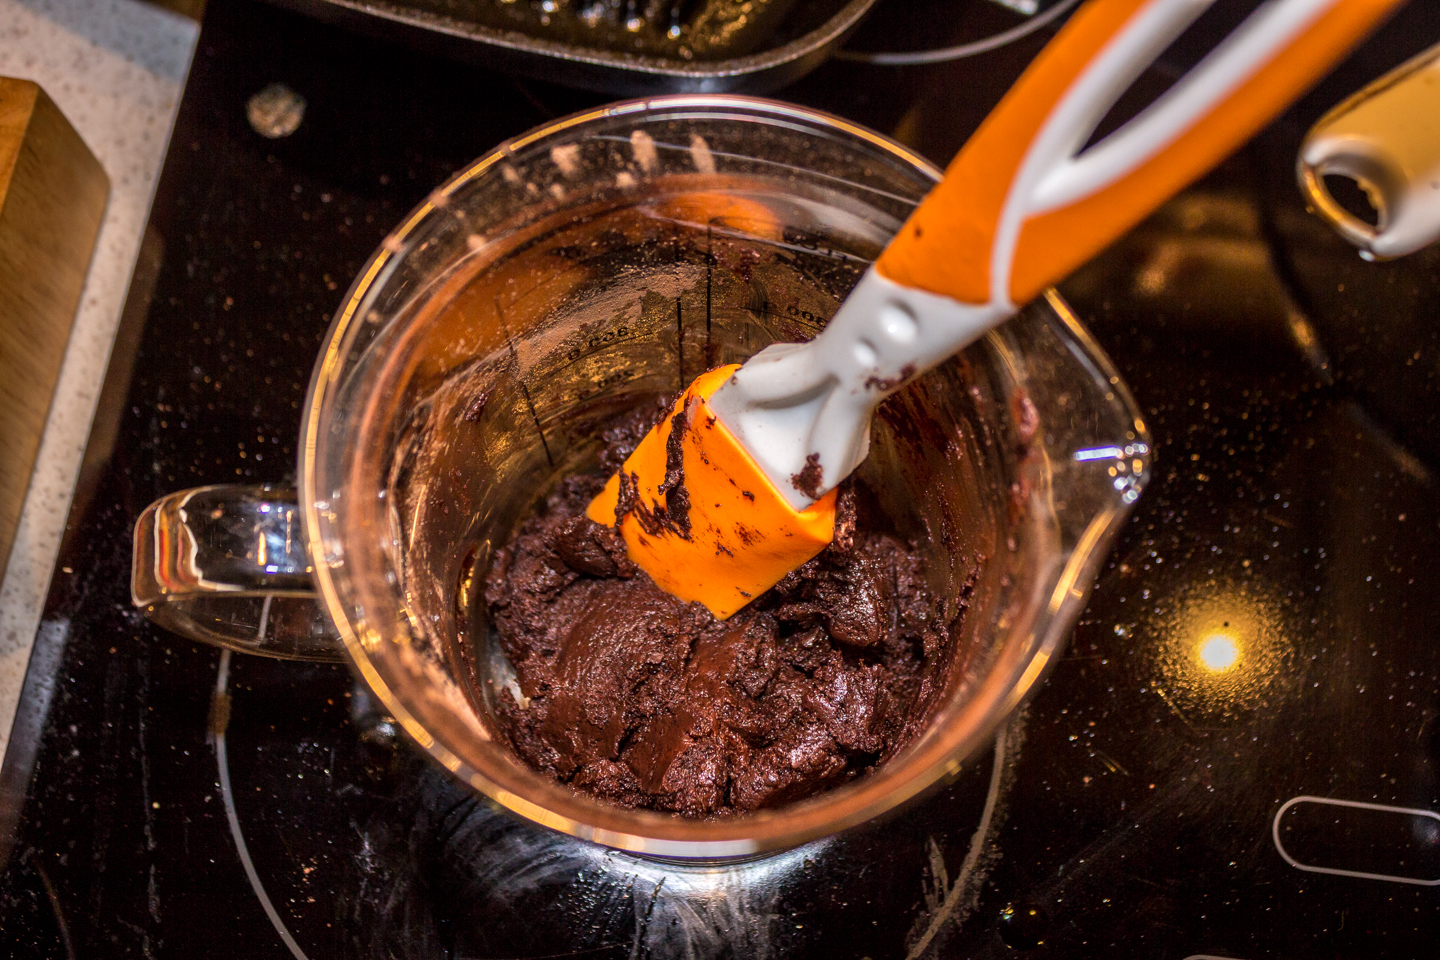 Mix the brownie ingredients into a beaker so it doesn't spill everywhere